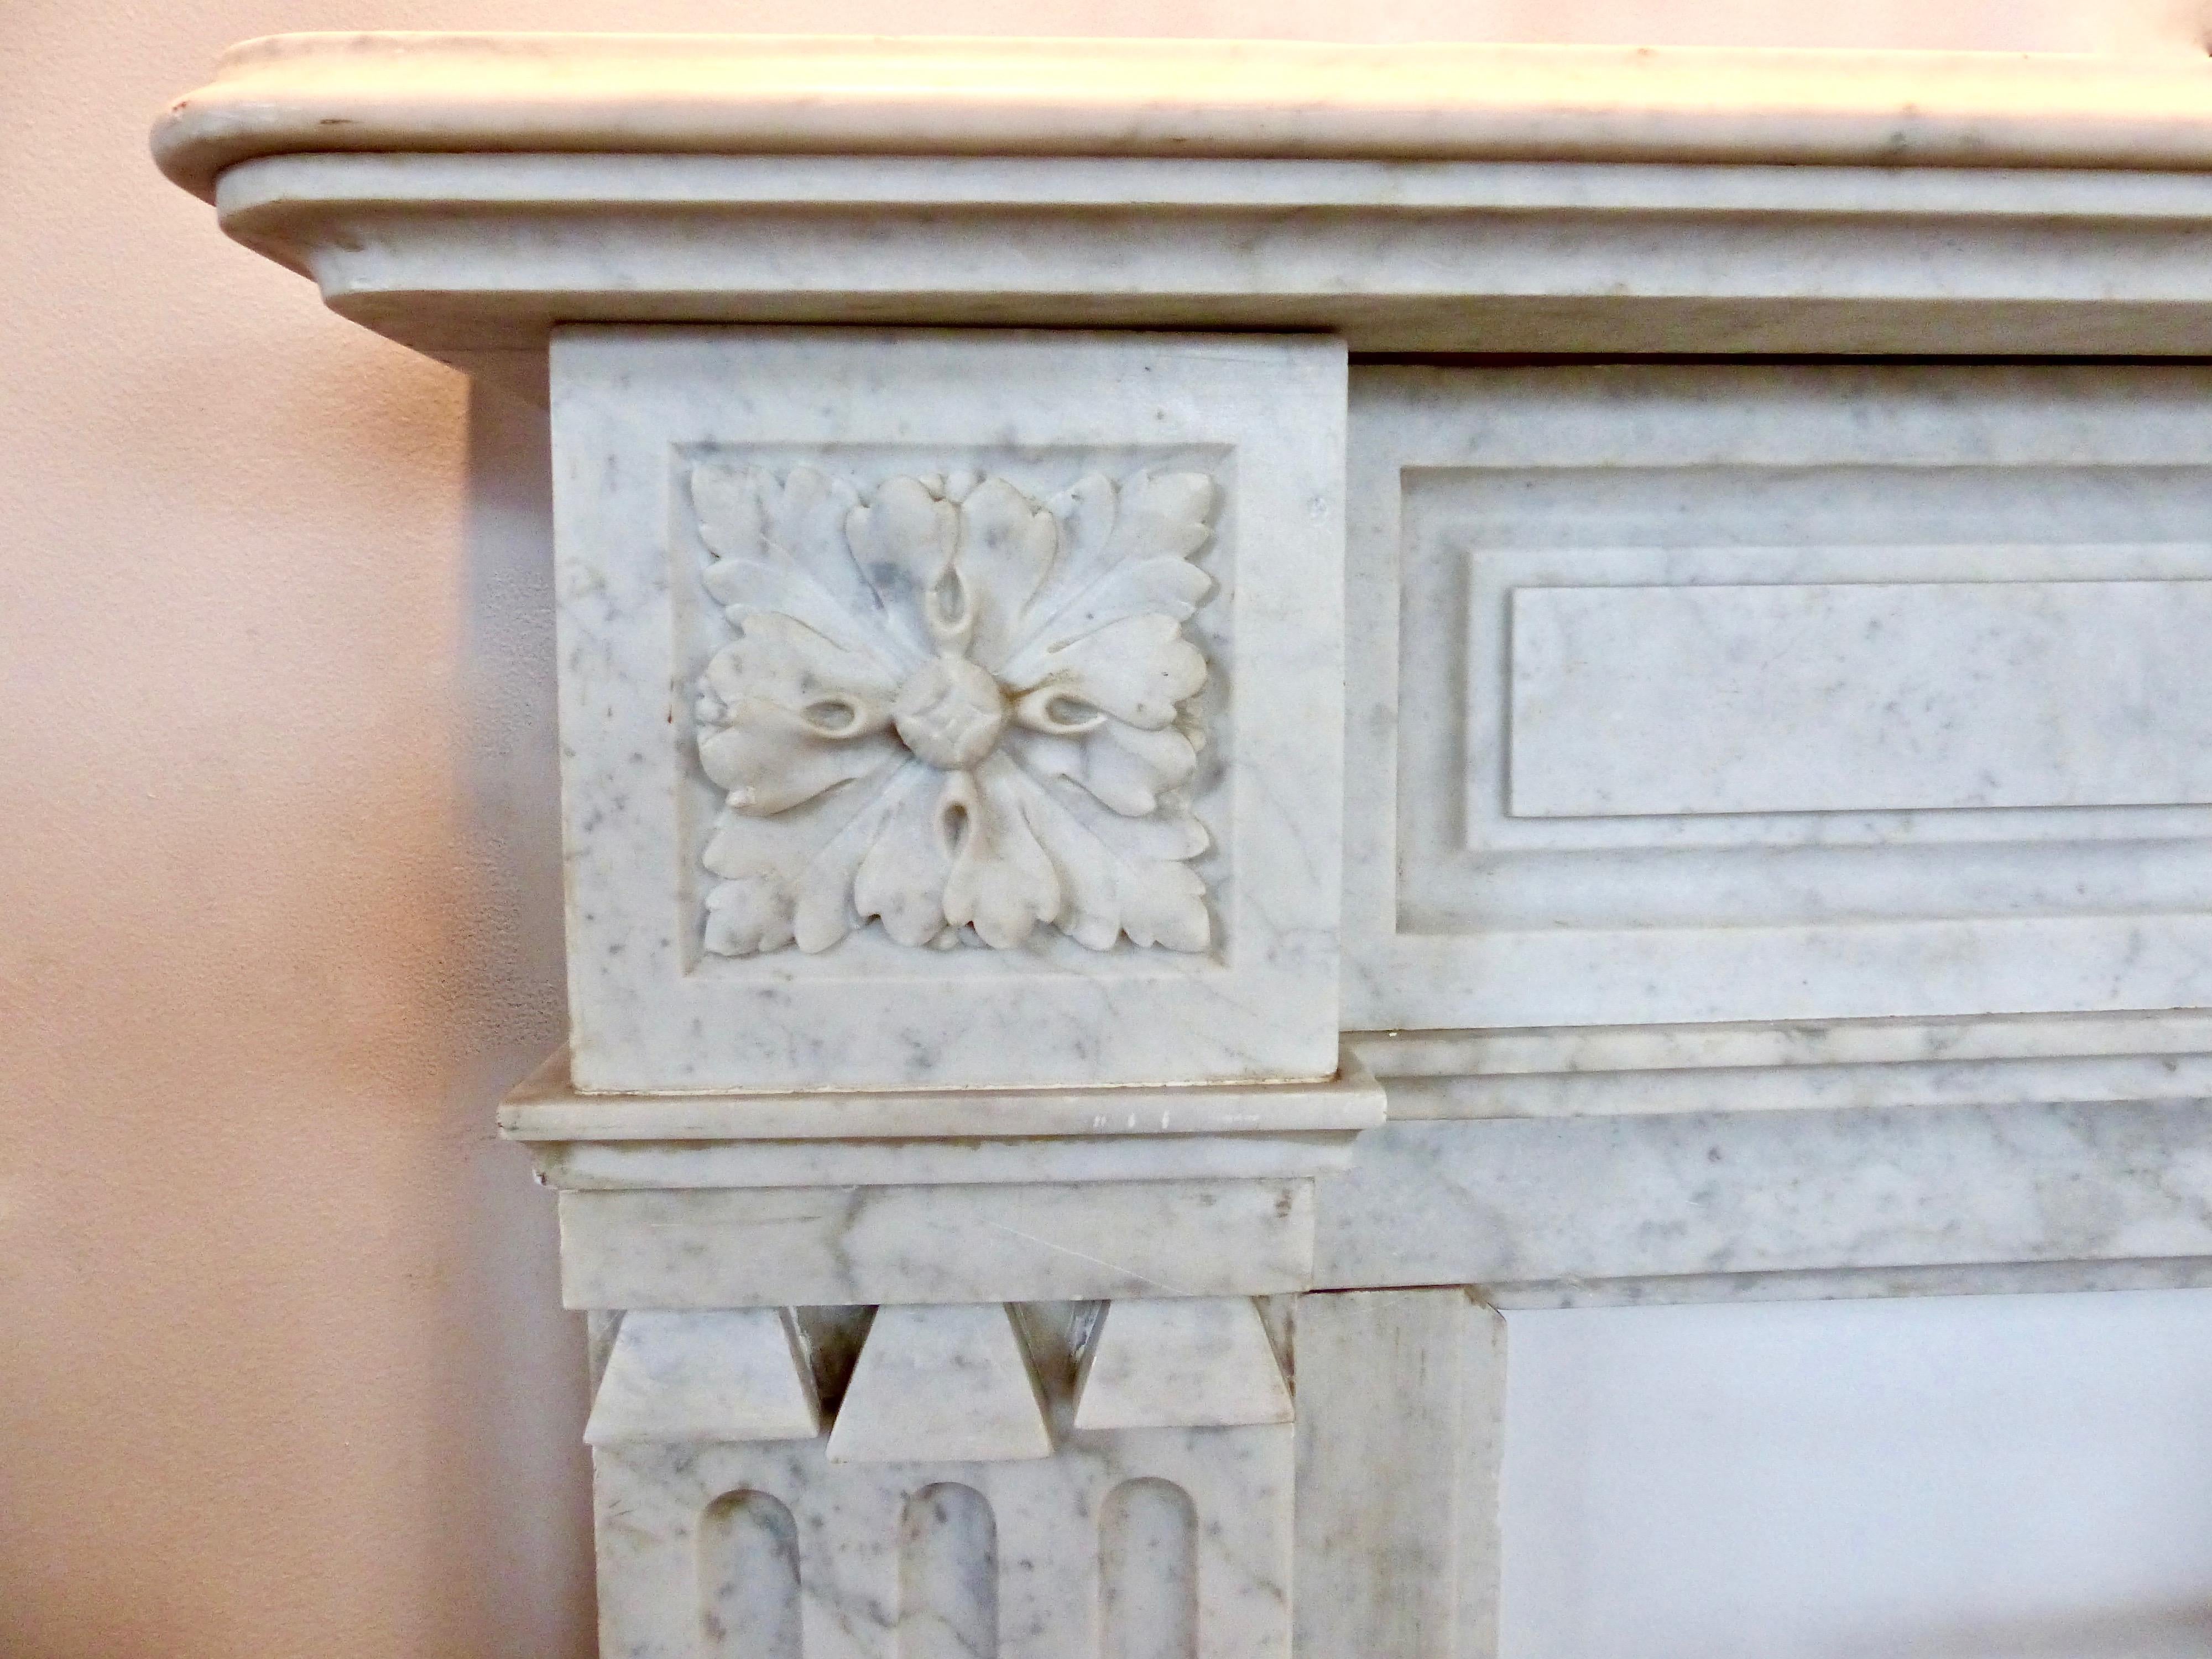 A French, handcrafted fireplace mantel/surround, circa 1860. Made from white Carrara marble with subtle decorative touches throughout, including unusual tiny scroll-work in its columns. Featuring a tiered top, with rounded edges, and a hand carved